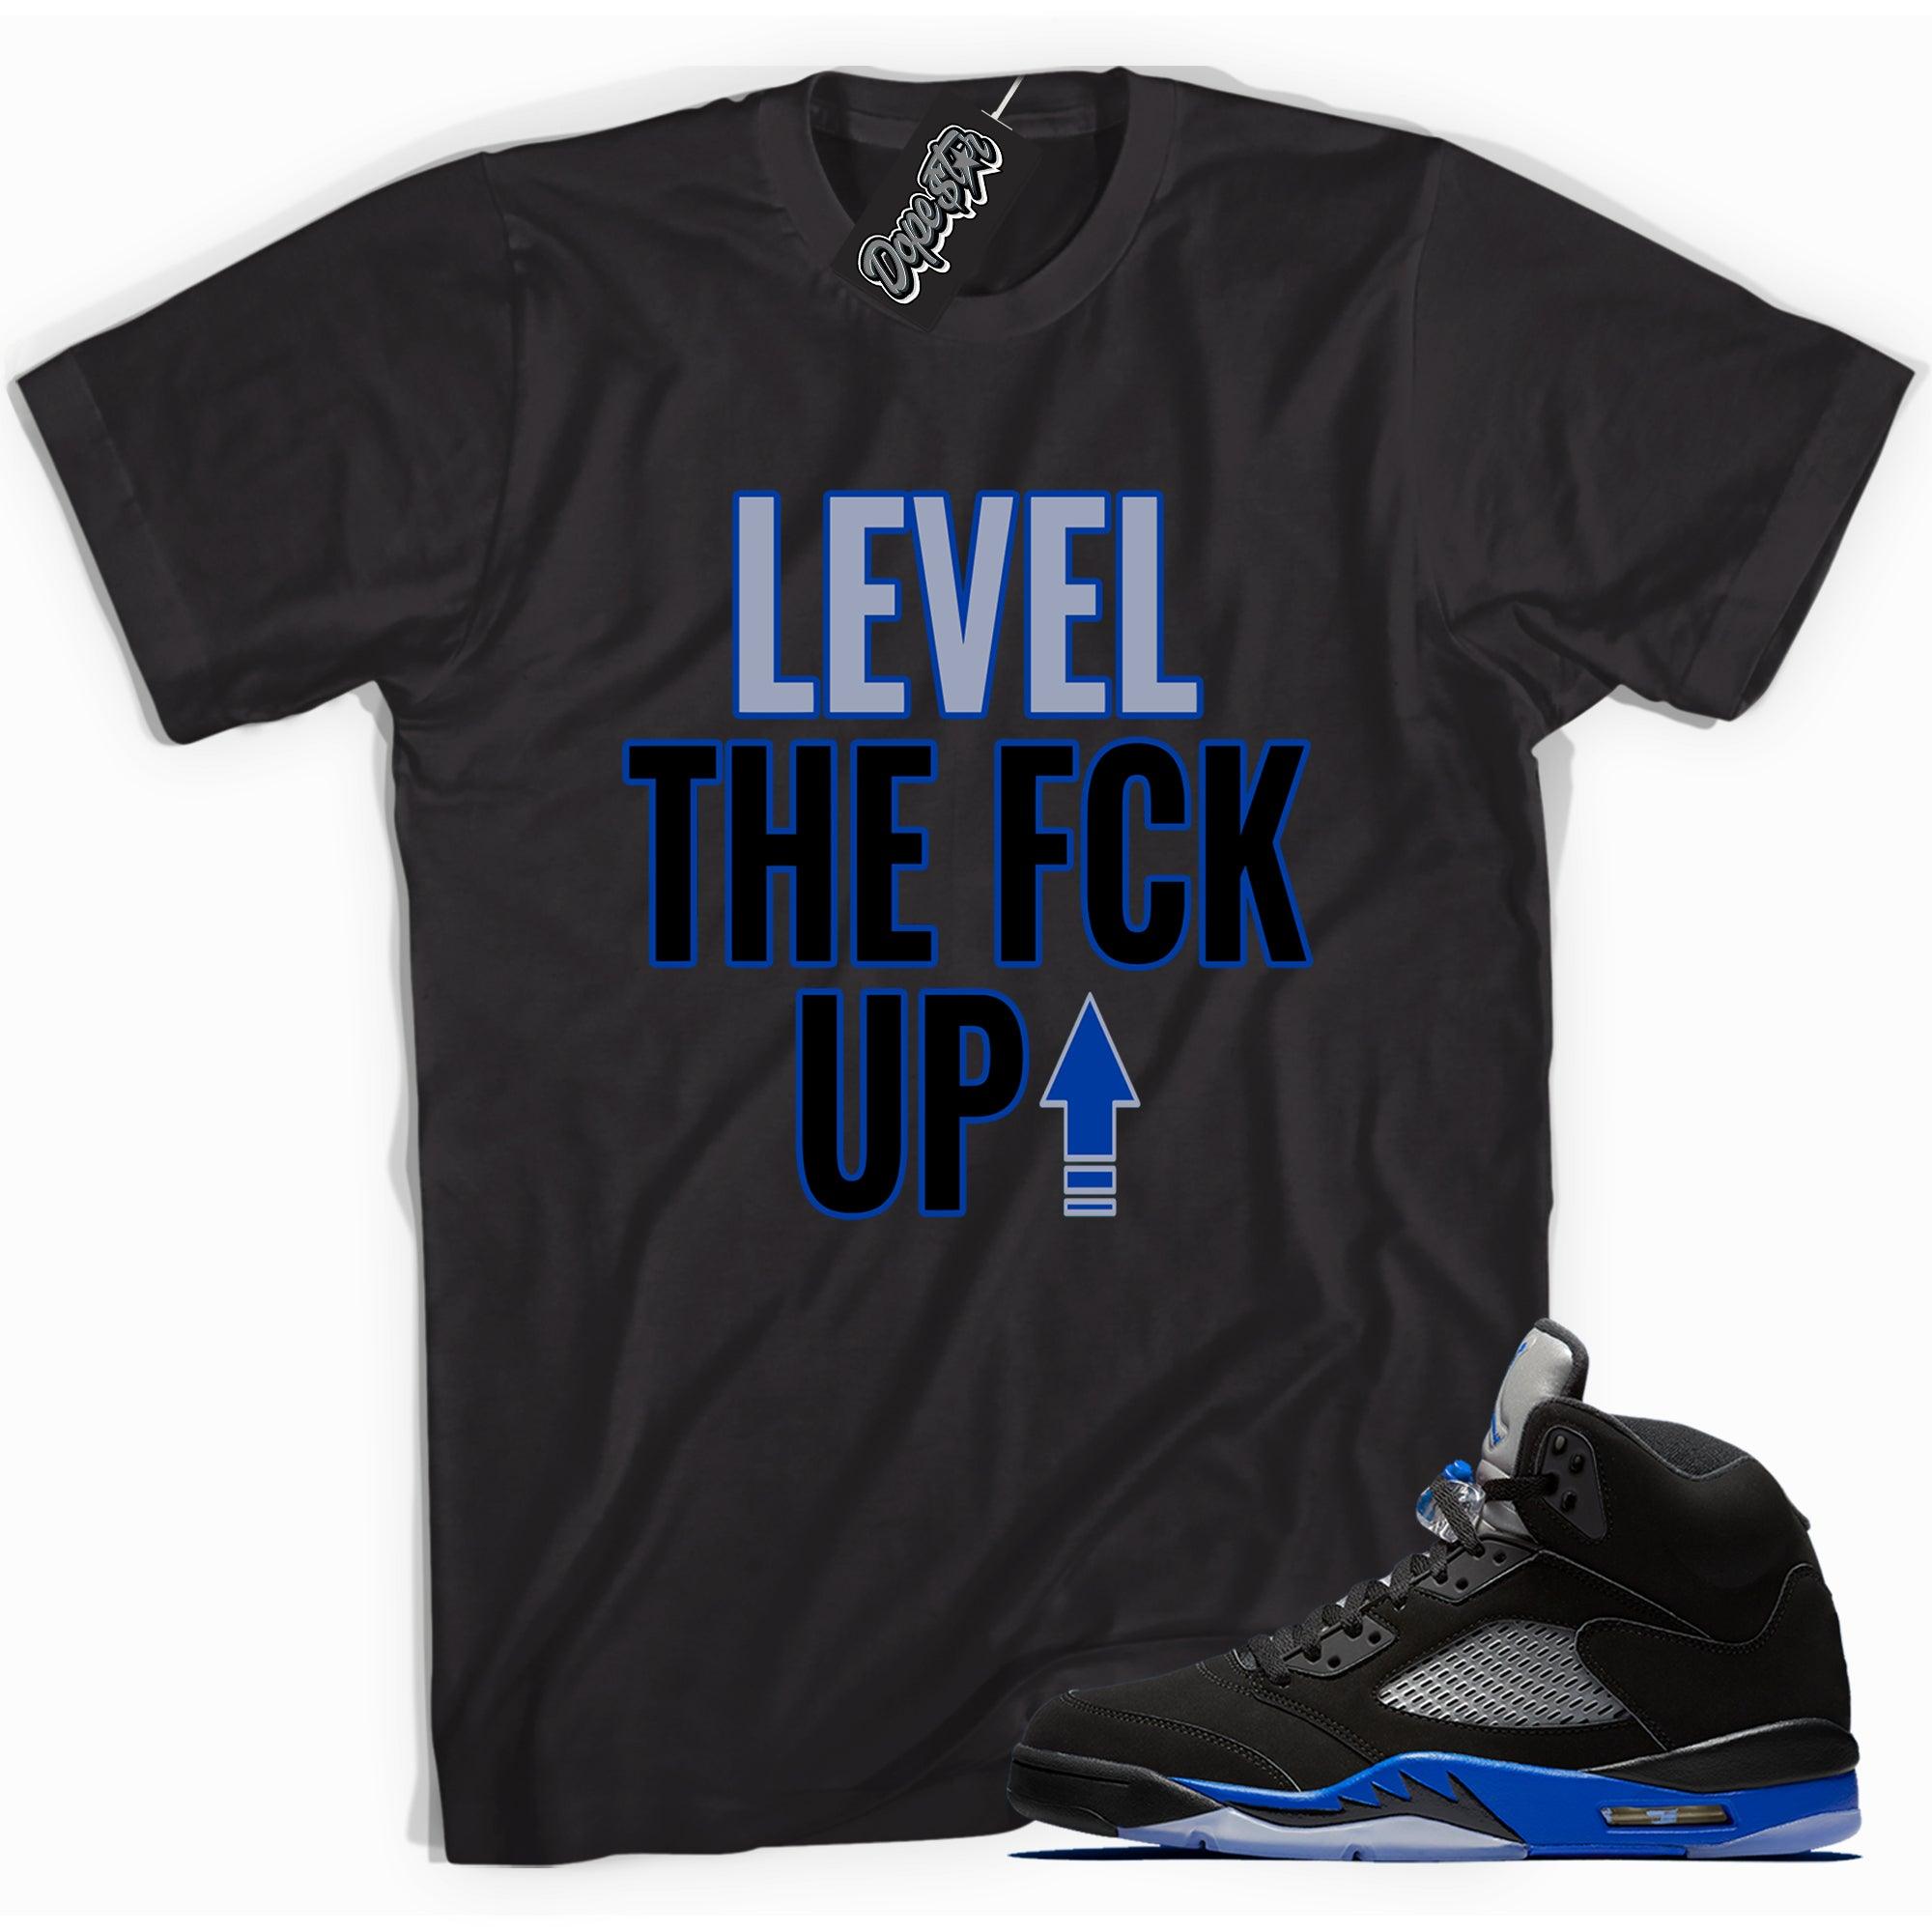 Cool black graphic tee with 'Level Up' print, that perfectly matches Air Jordan 5 Racer Blue Toe sneakers.